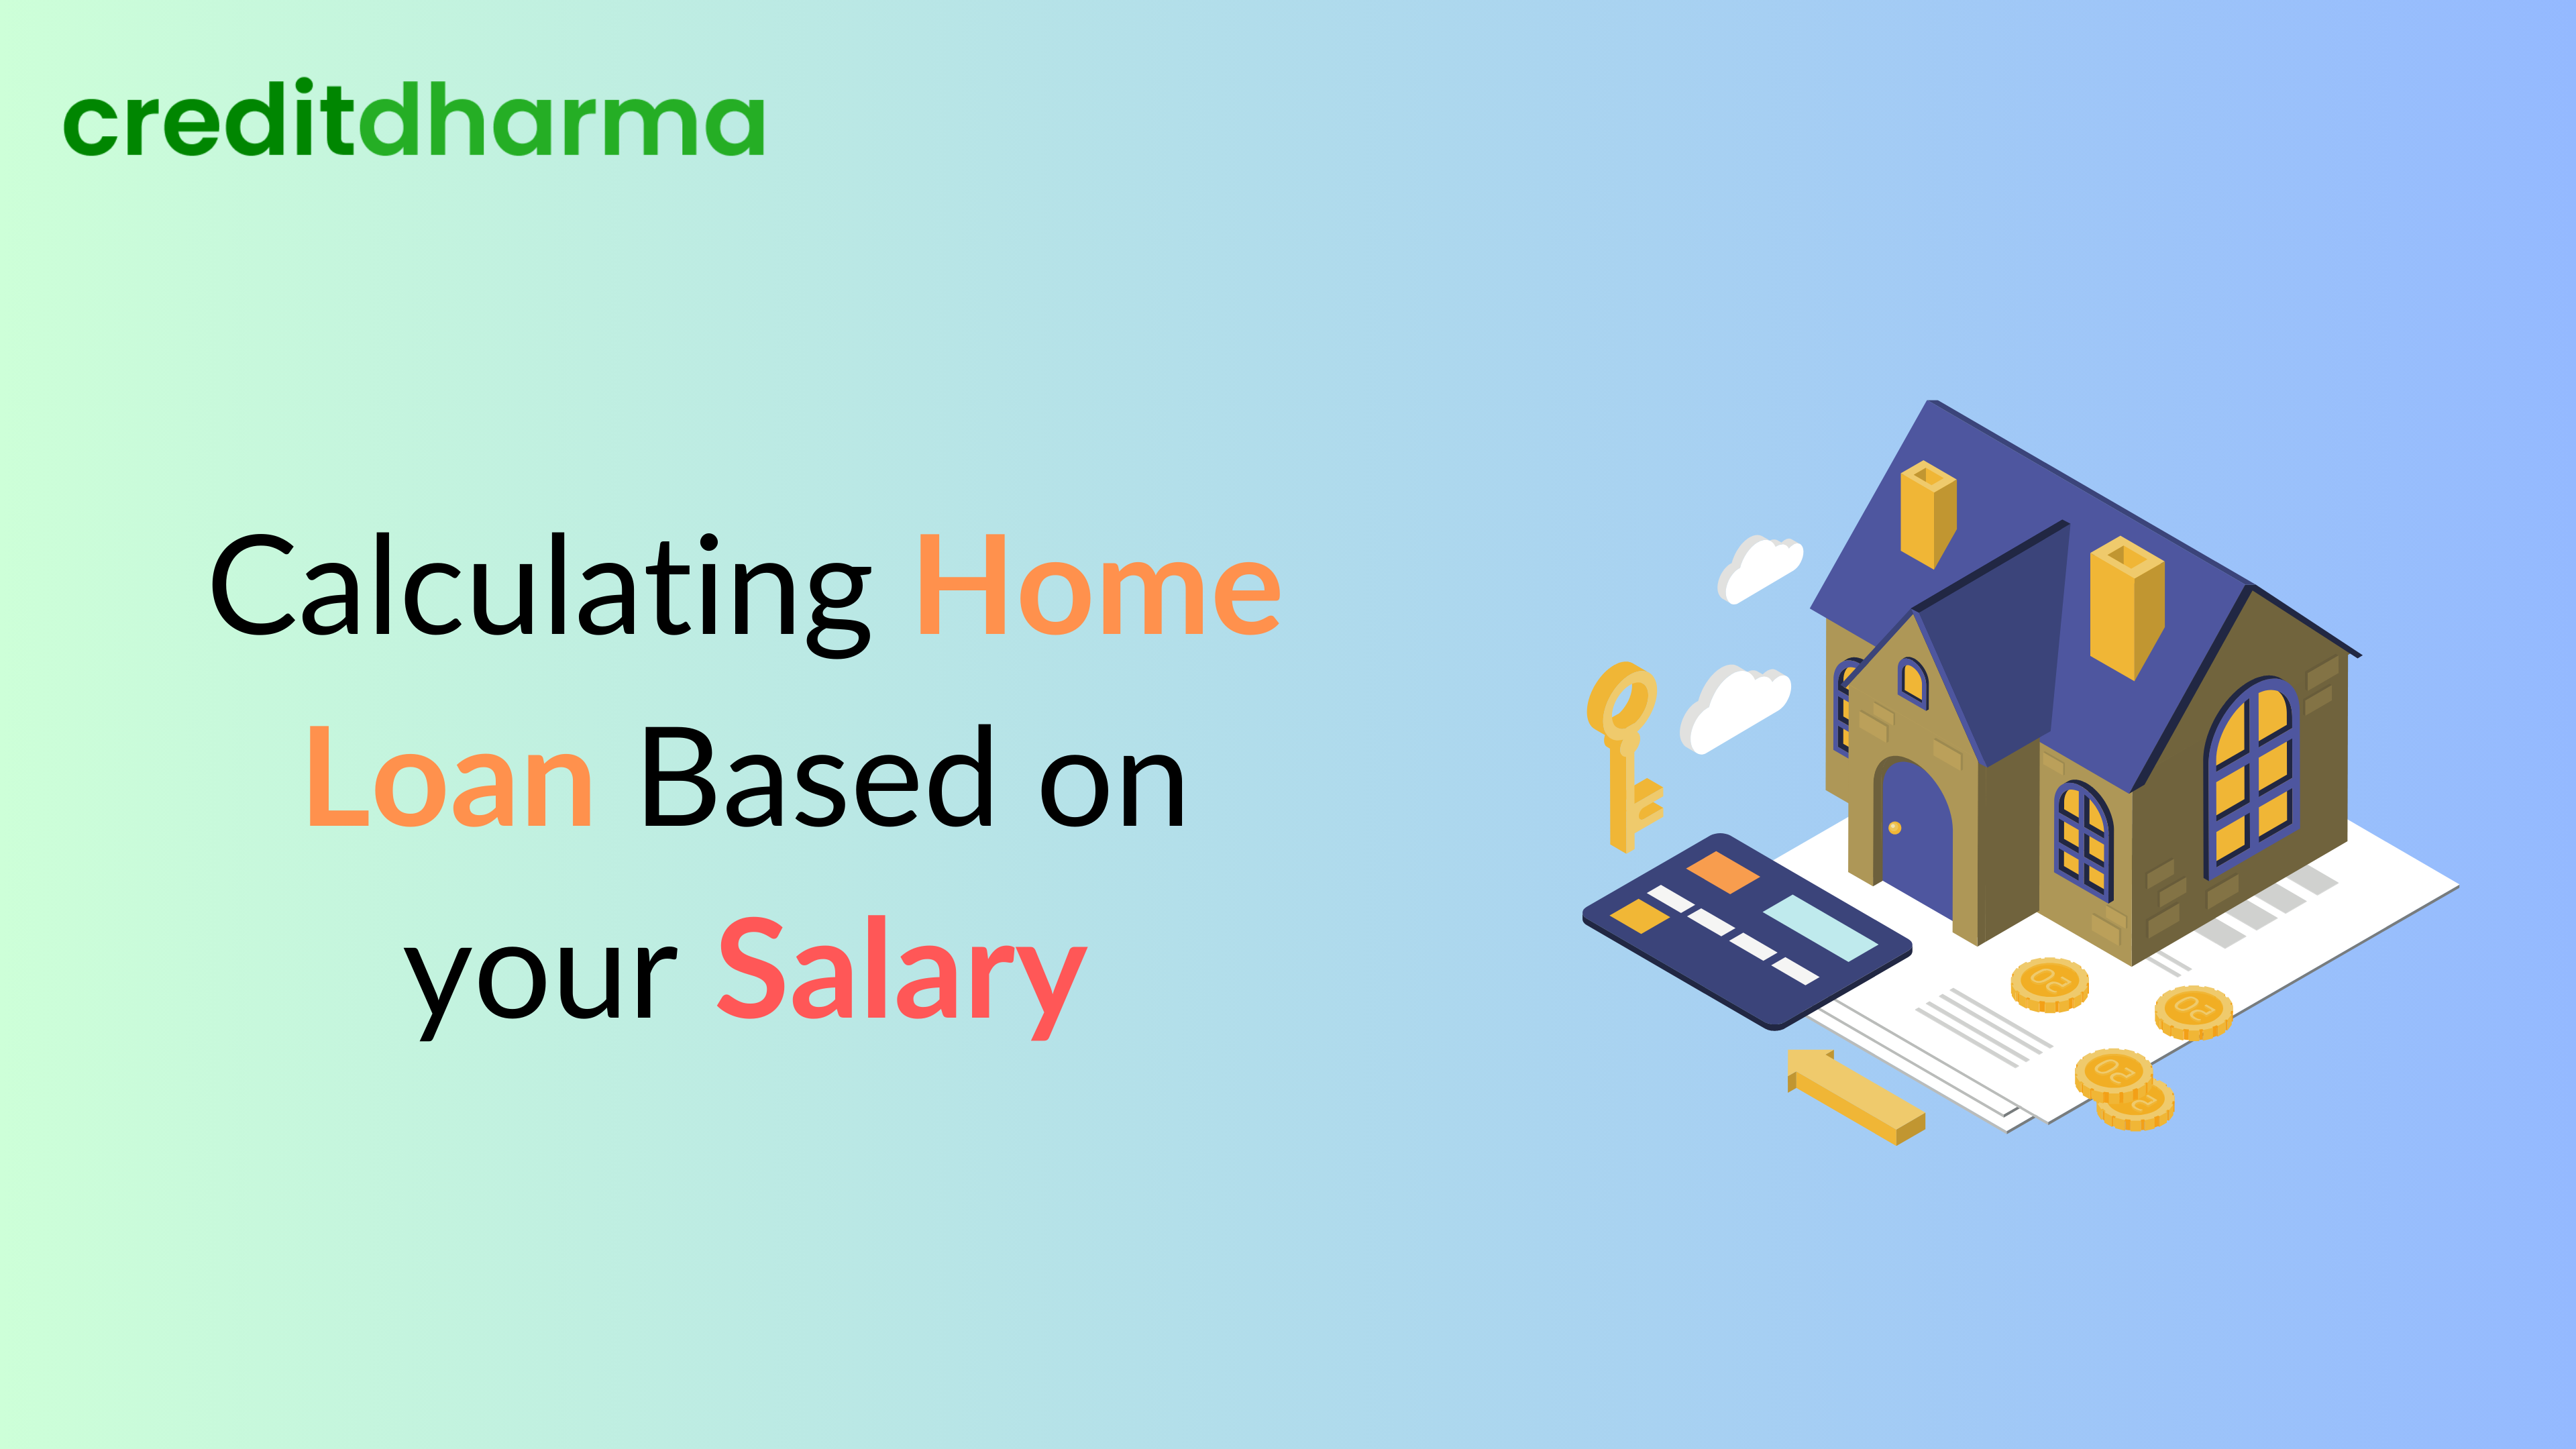 Calculating Home Loan Based on your Salary